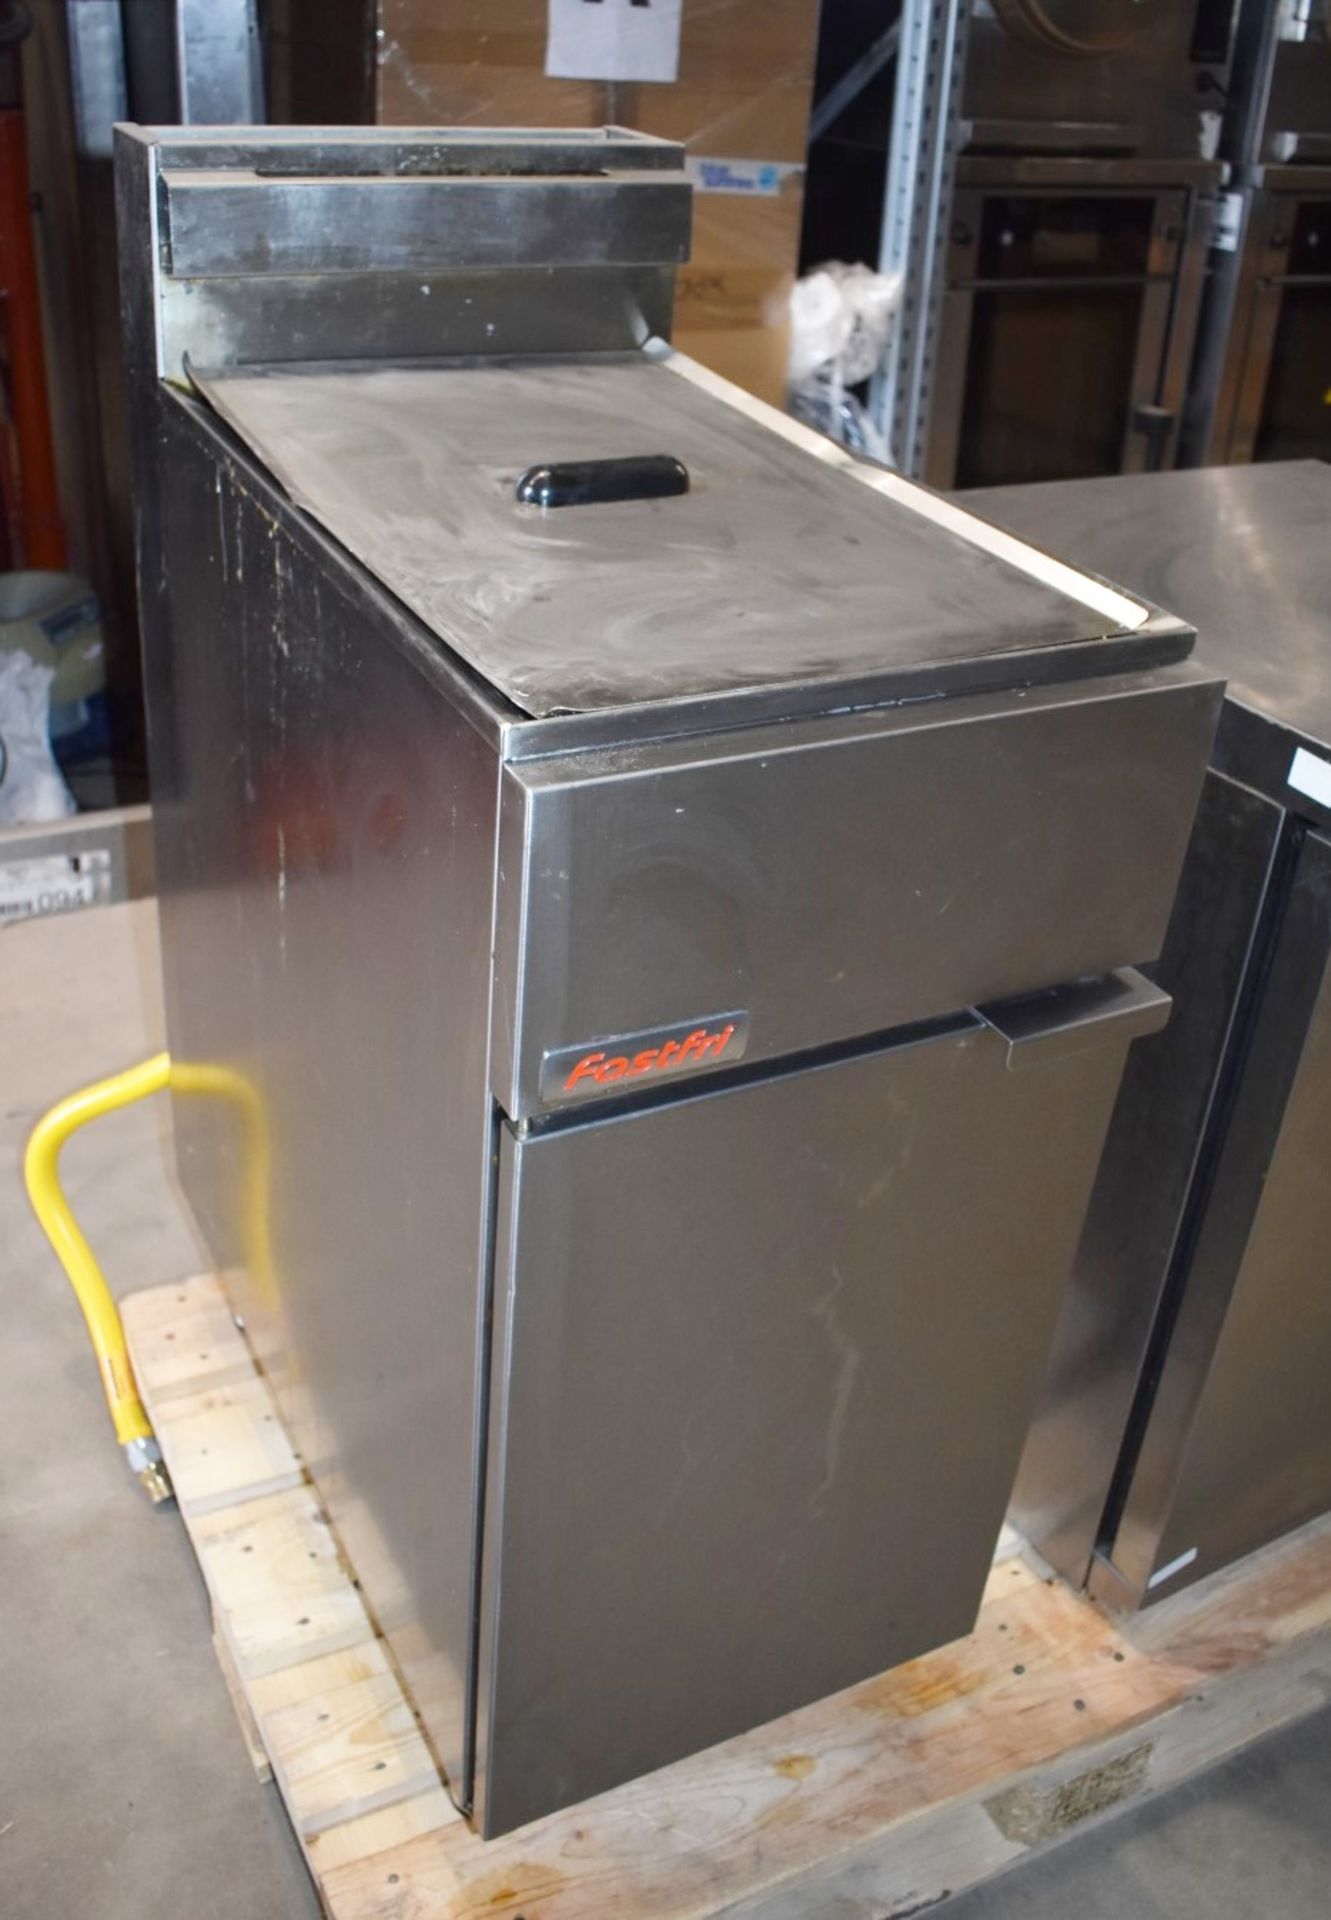 1 x Moffat Fast Fri FF18 Single Tank Commercial Gas Fryer With Stainless Steel Exterior - Image 6 of 13